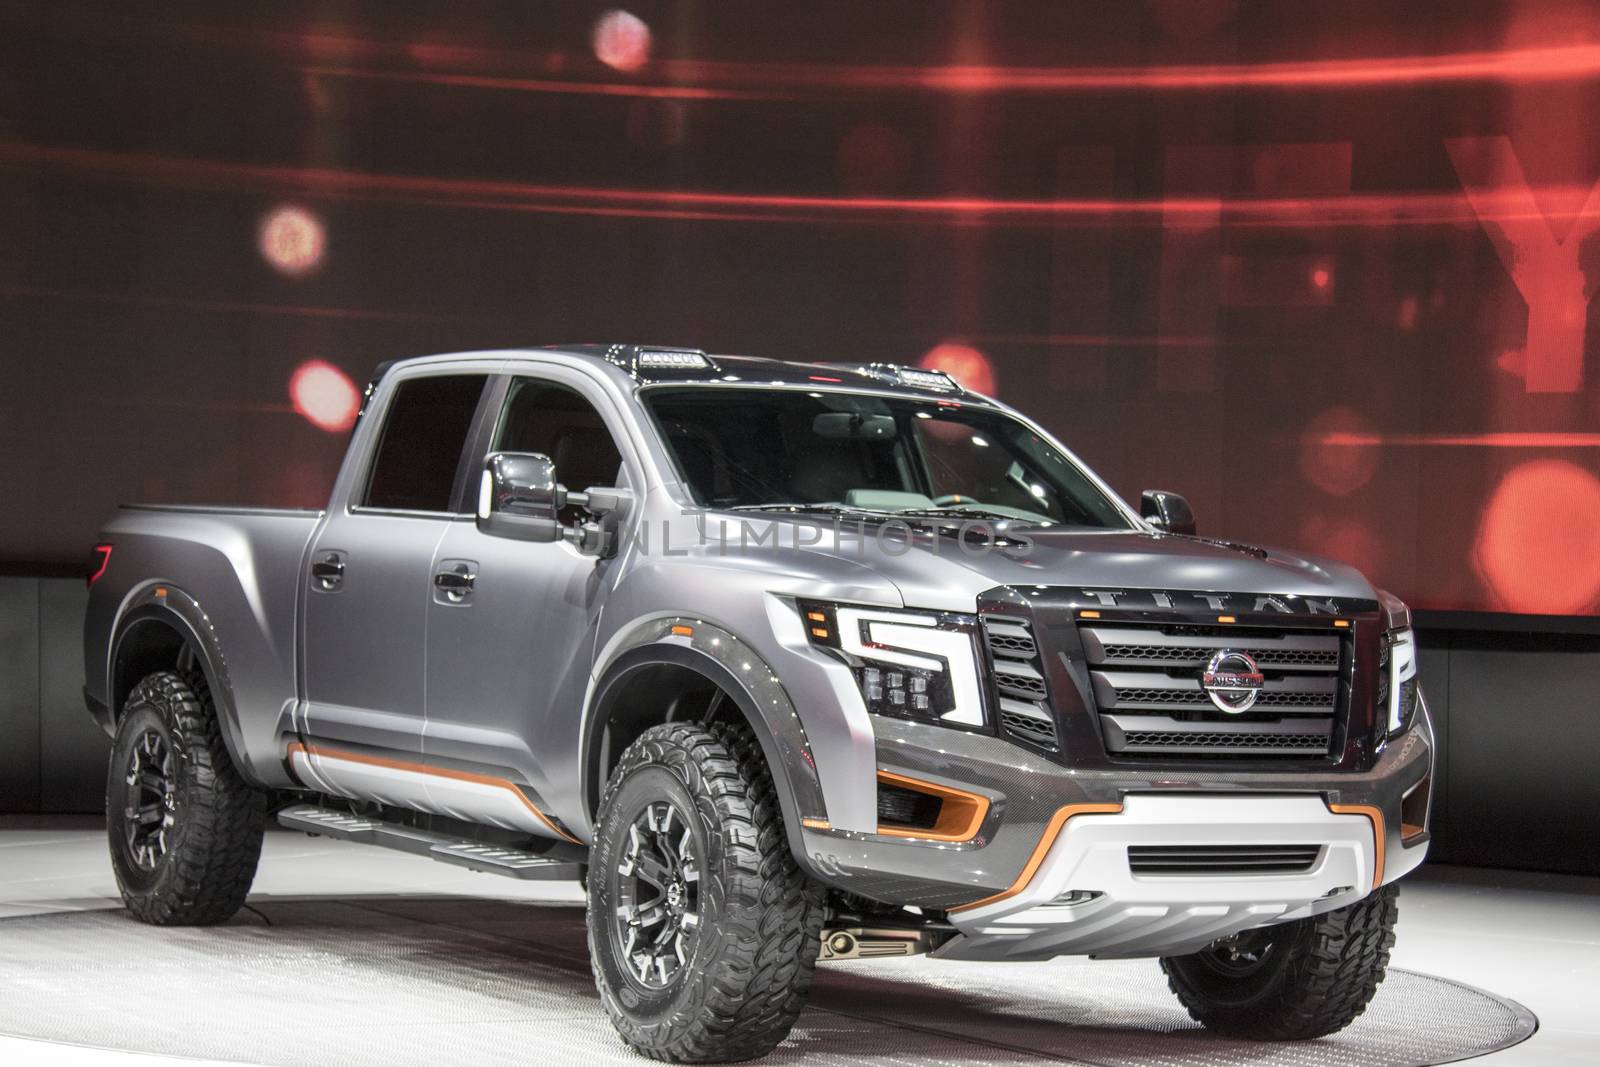 DETROIT - JANUARY 17 :The 2017 Nissan Titan Pickup truck at The North American International Auto Show January 17, 2016 in Detroit, Michigan.